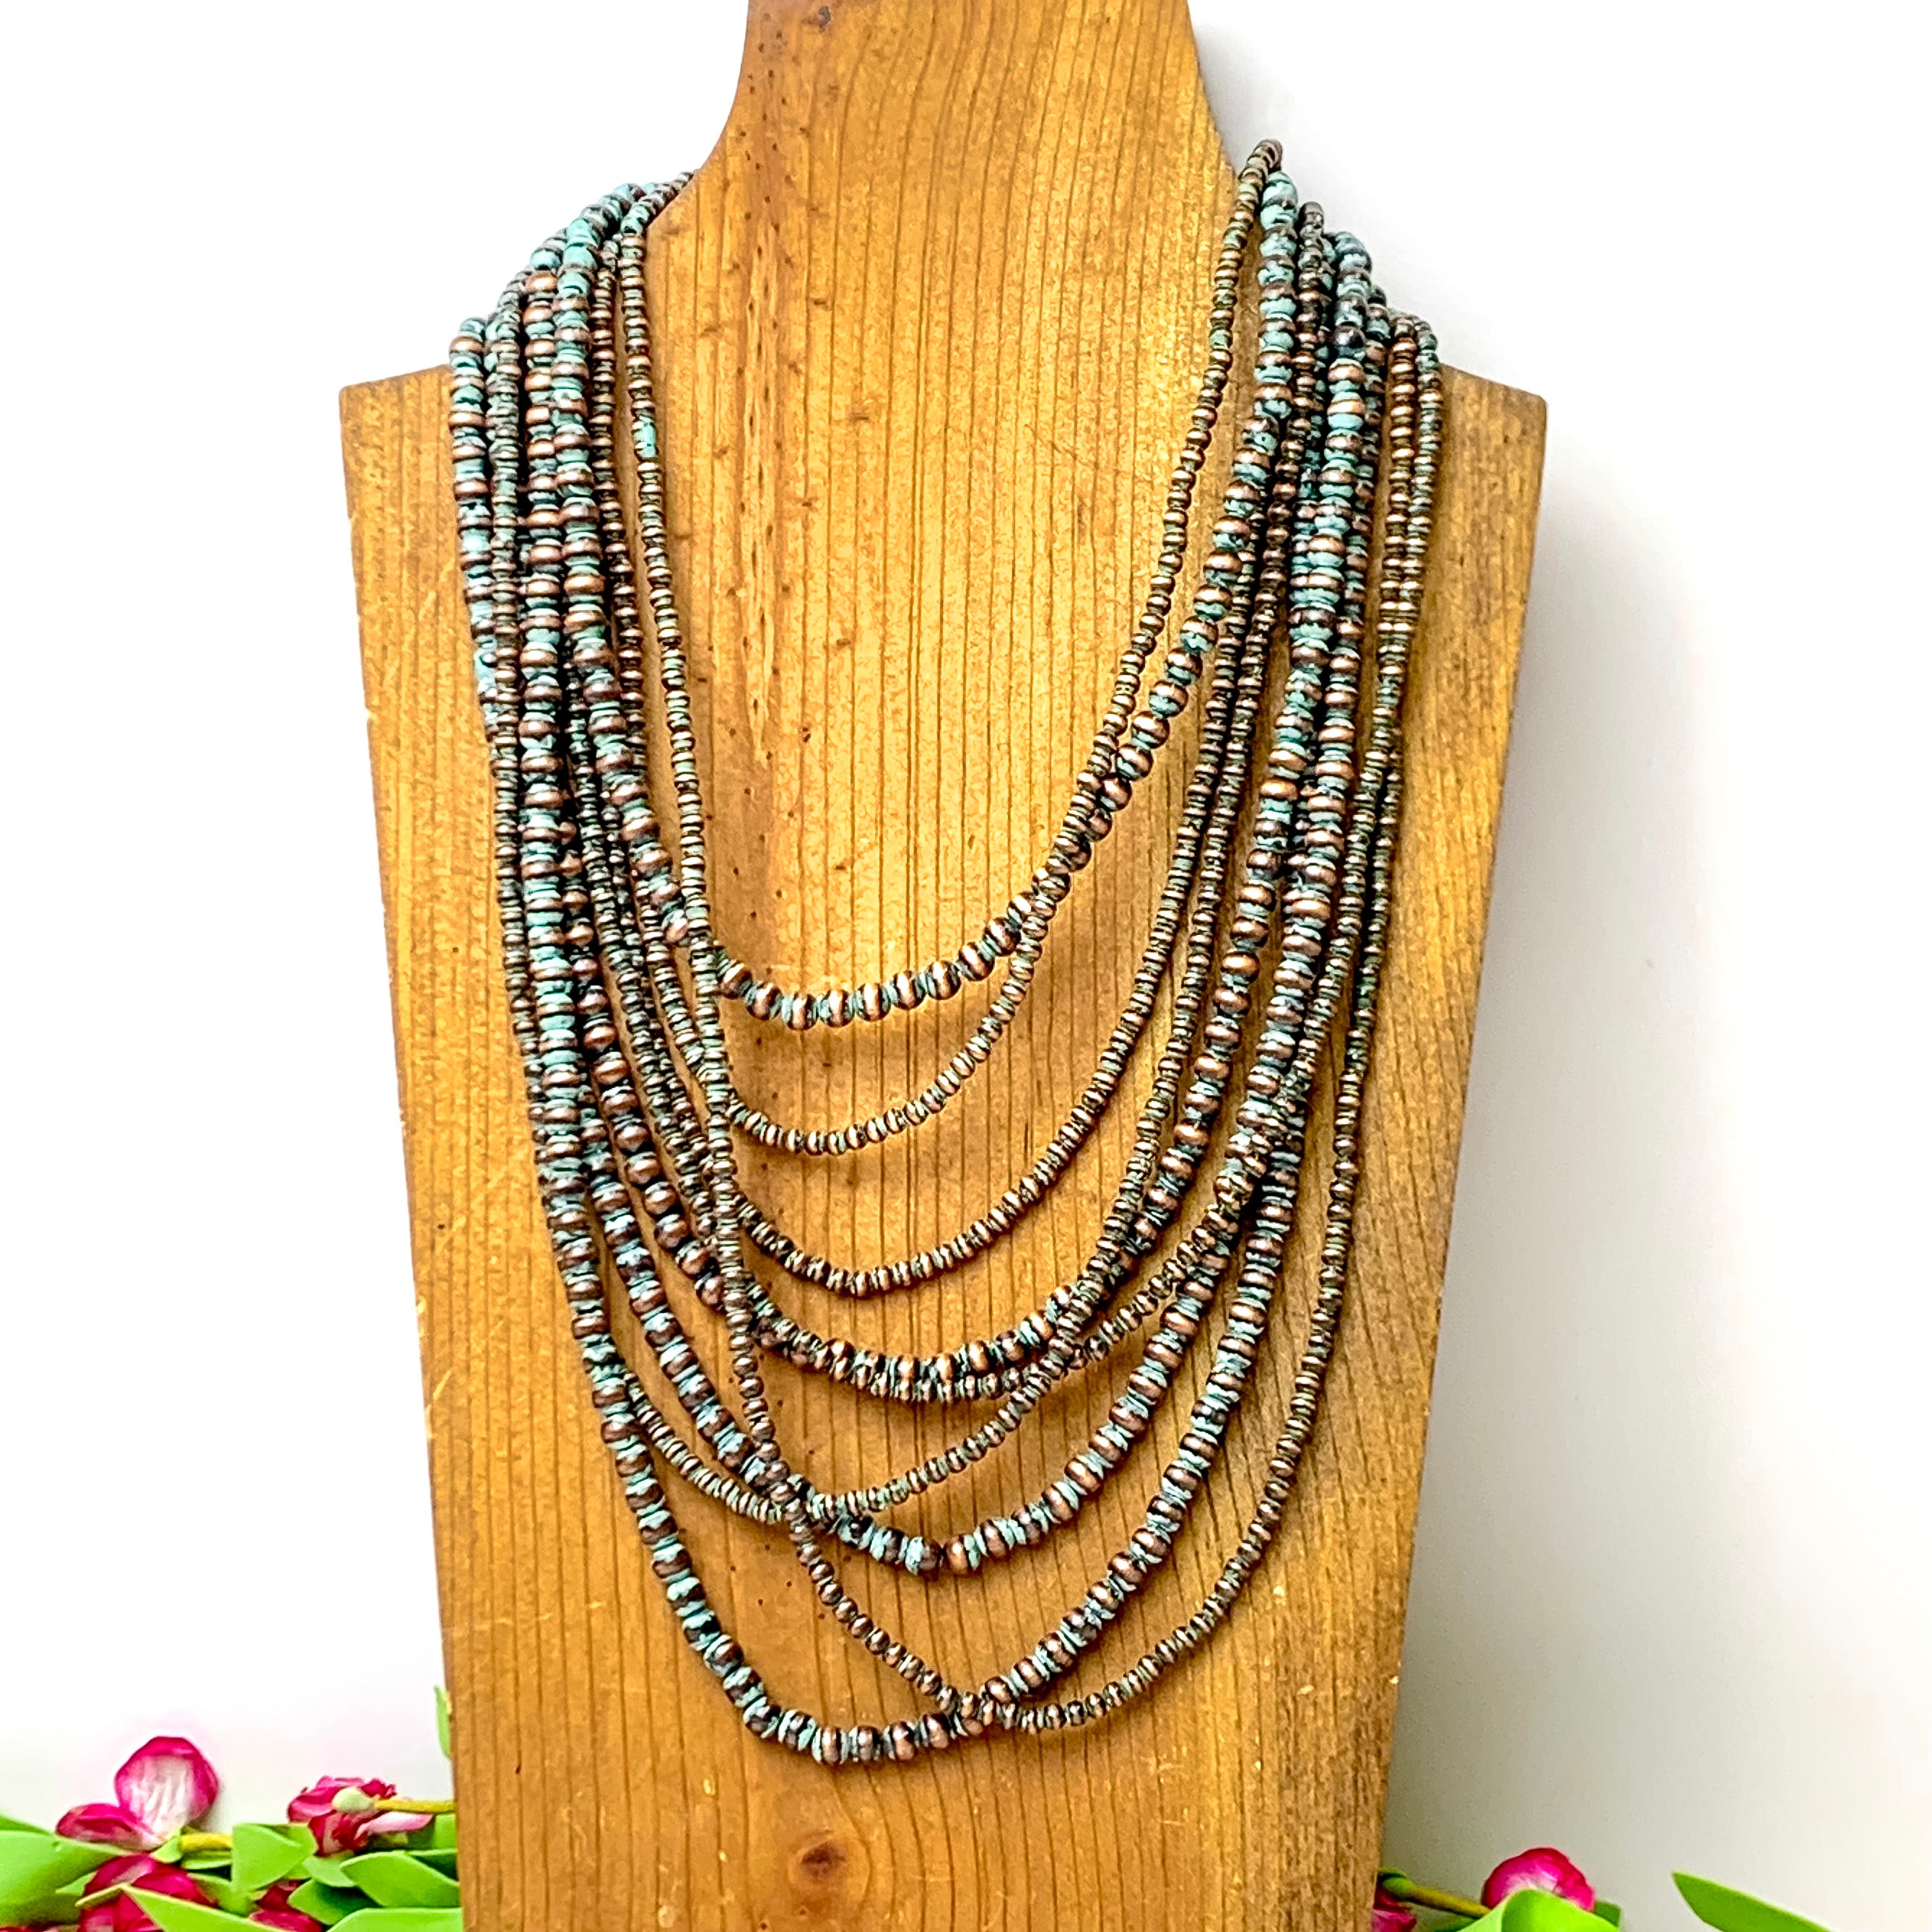 Nine Strand Faux Navajo Pearl Necklace in Patina Tone - Giddy Up Glamour Boutique